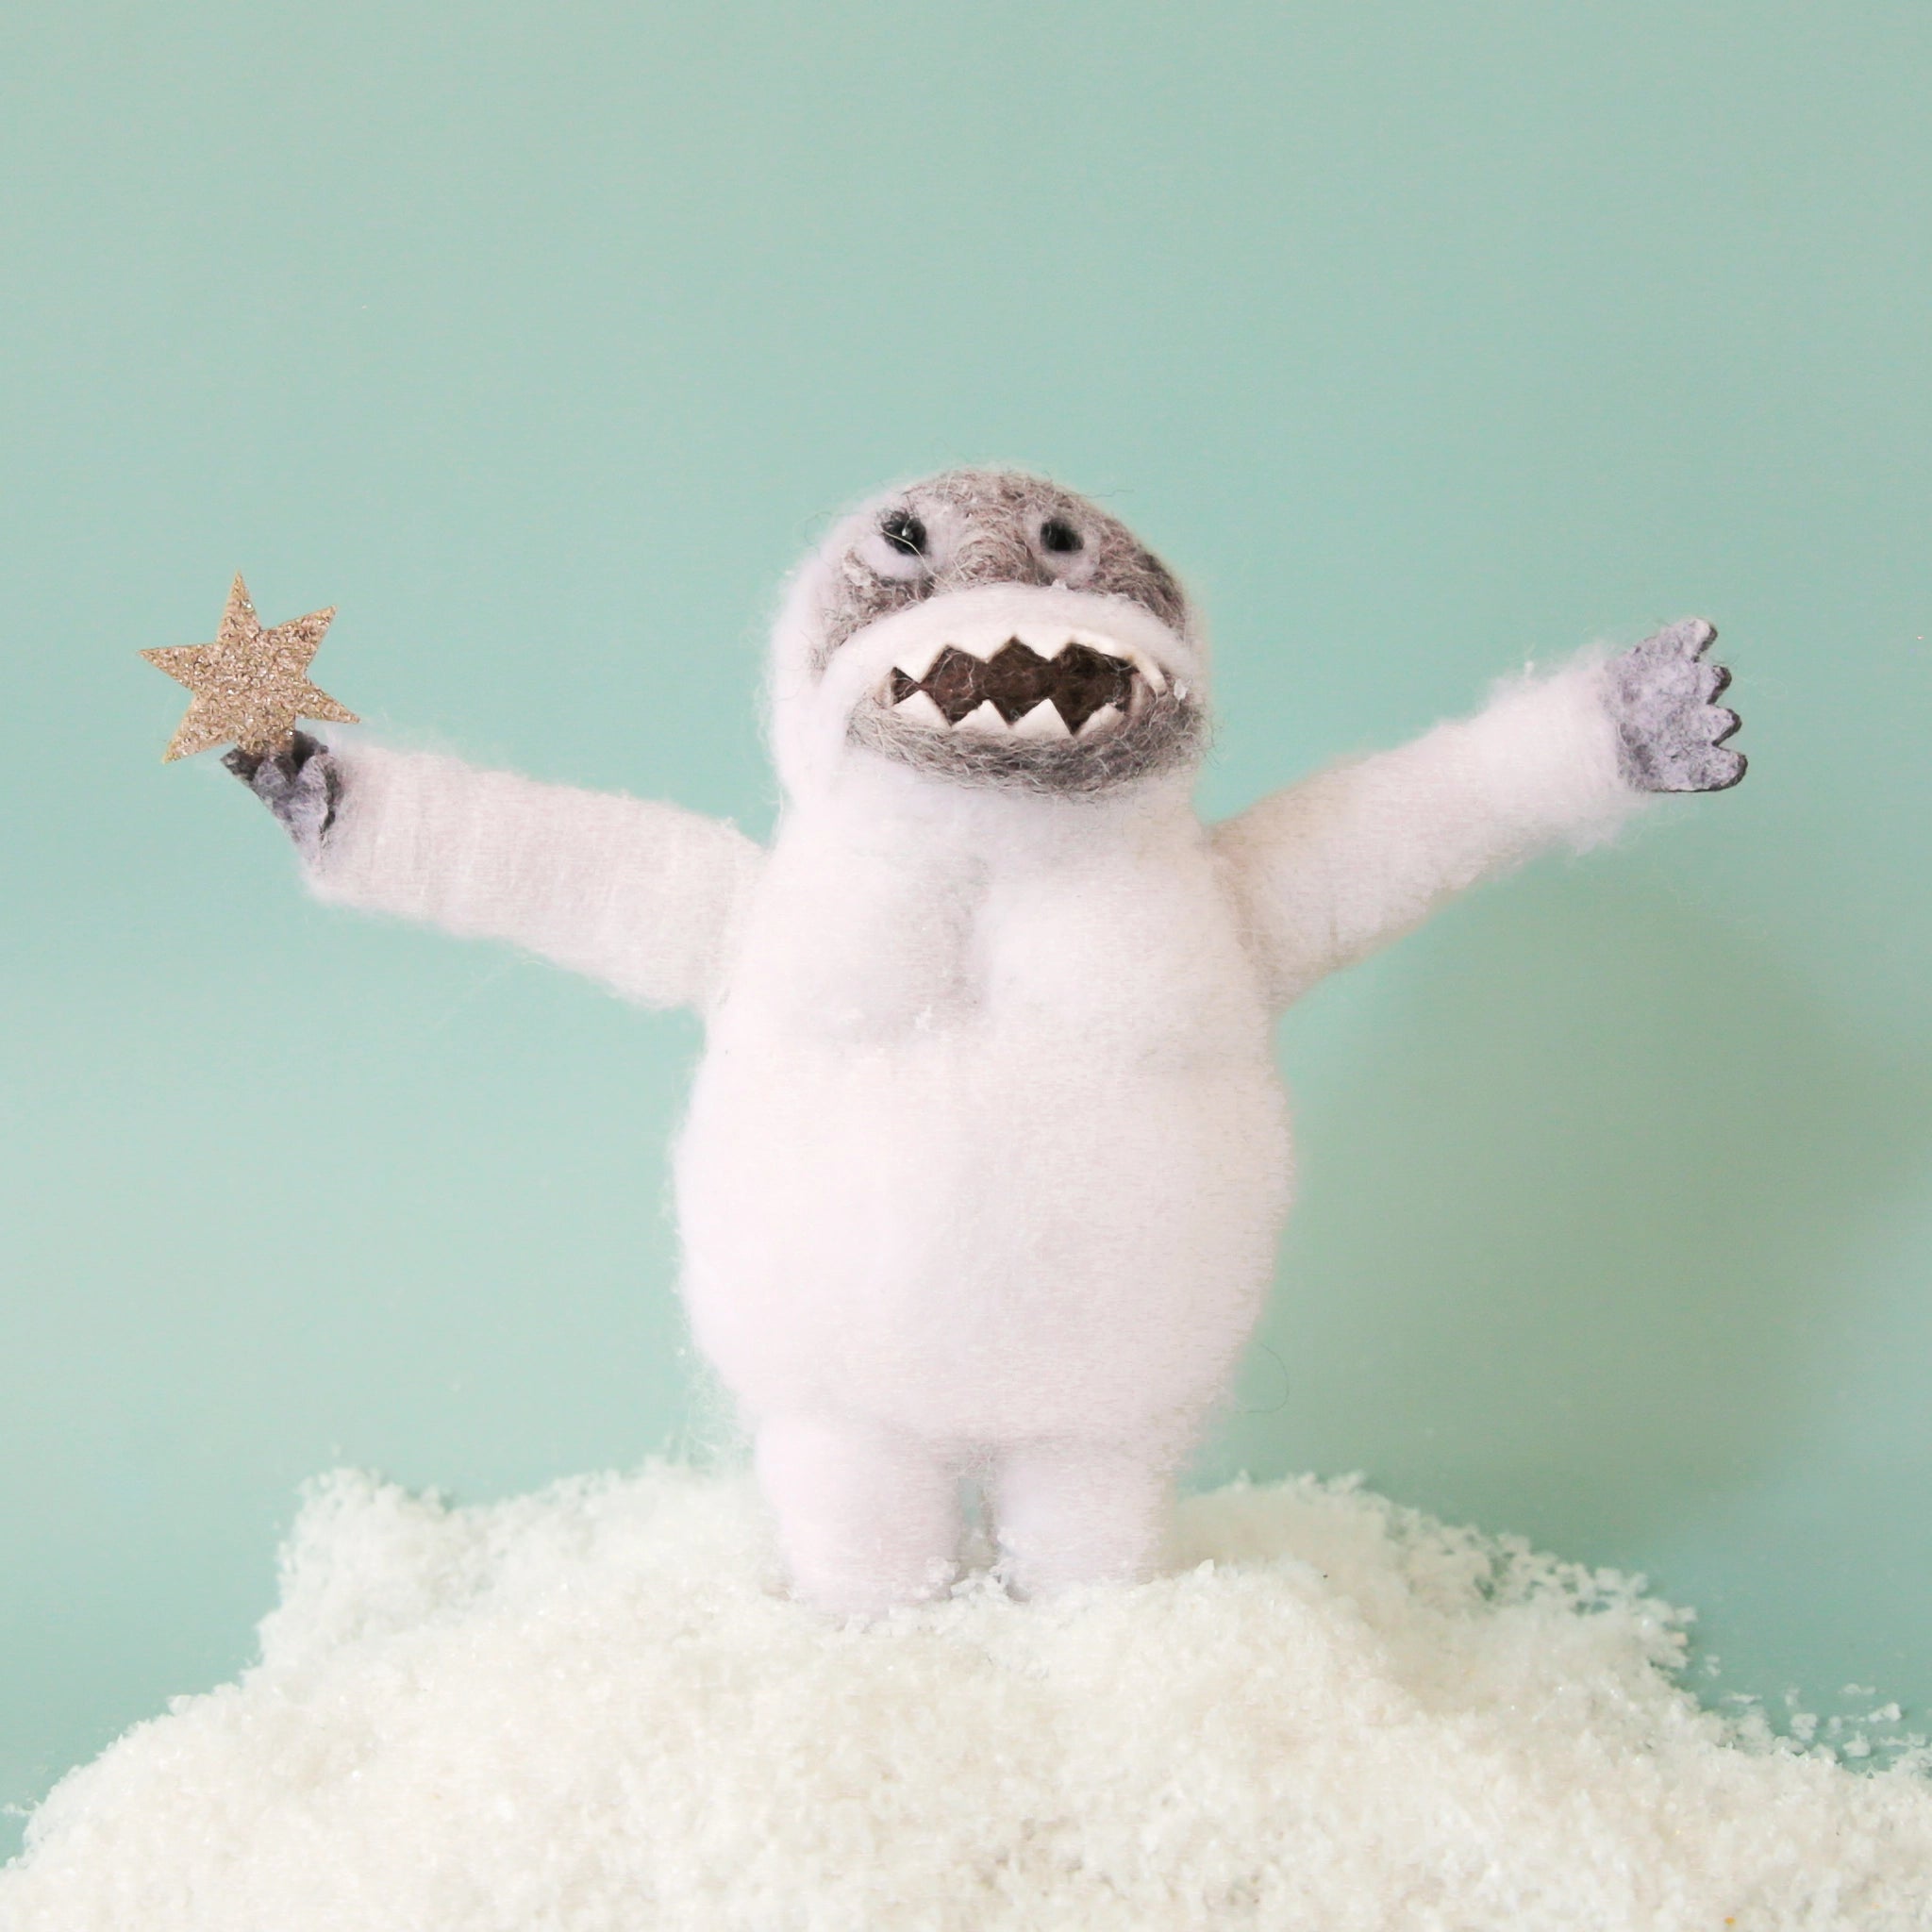 On a light green background is a white and grey felt abominable snowman ornament that&#39;s holding a sparkly star. 